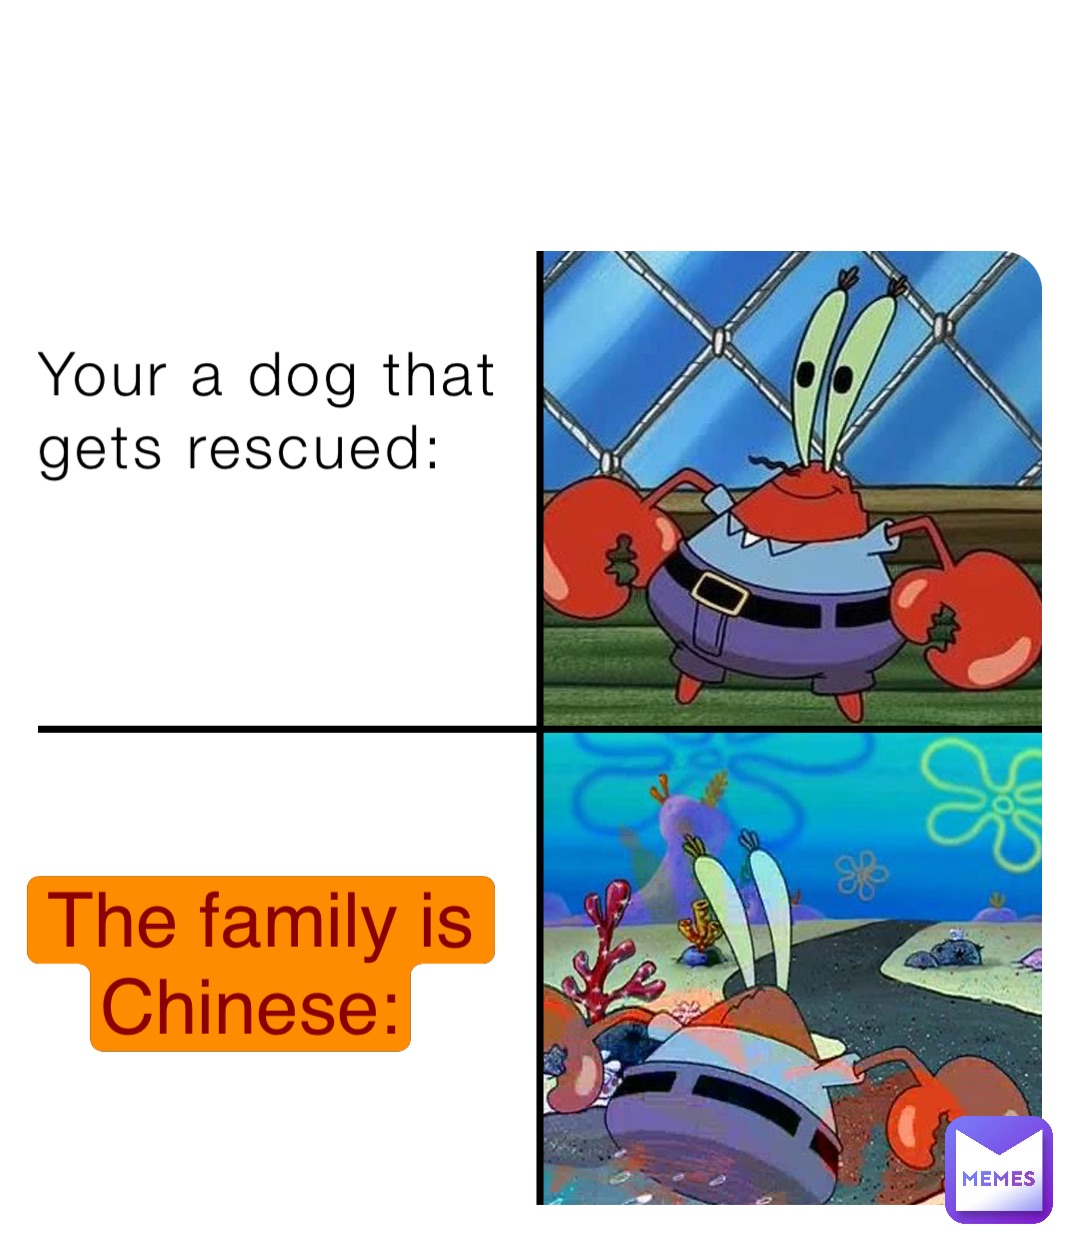 Your a dog that
gets rescued: The family is 
Chinese: